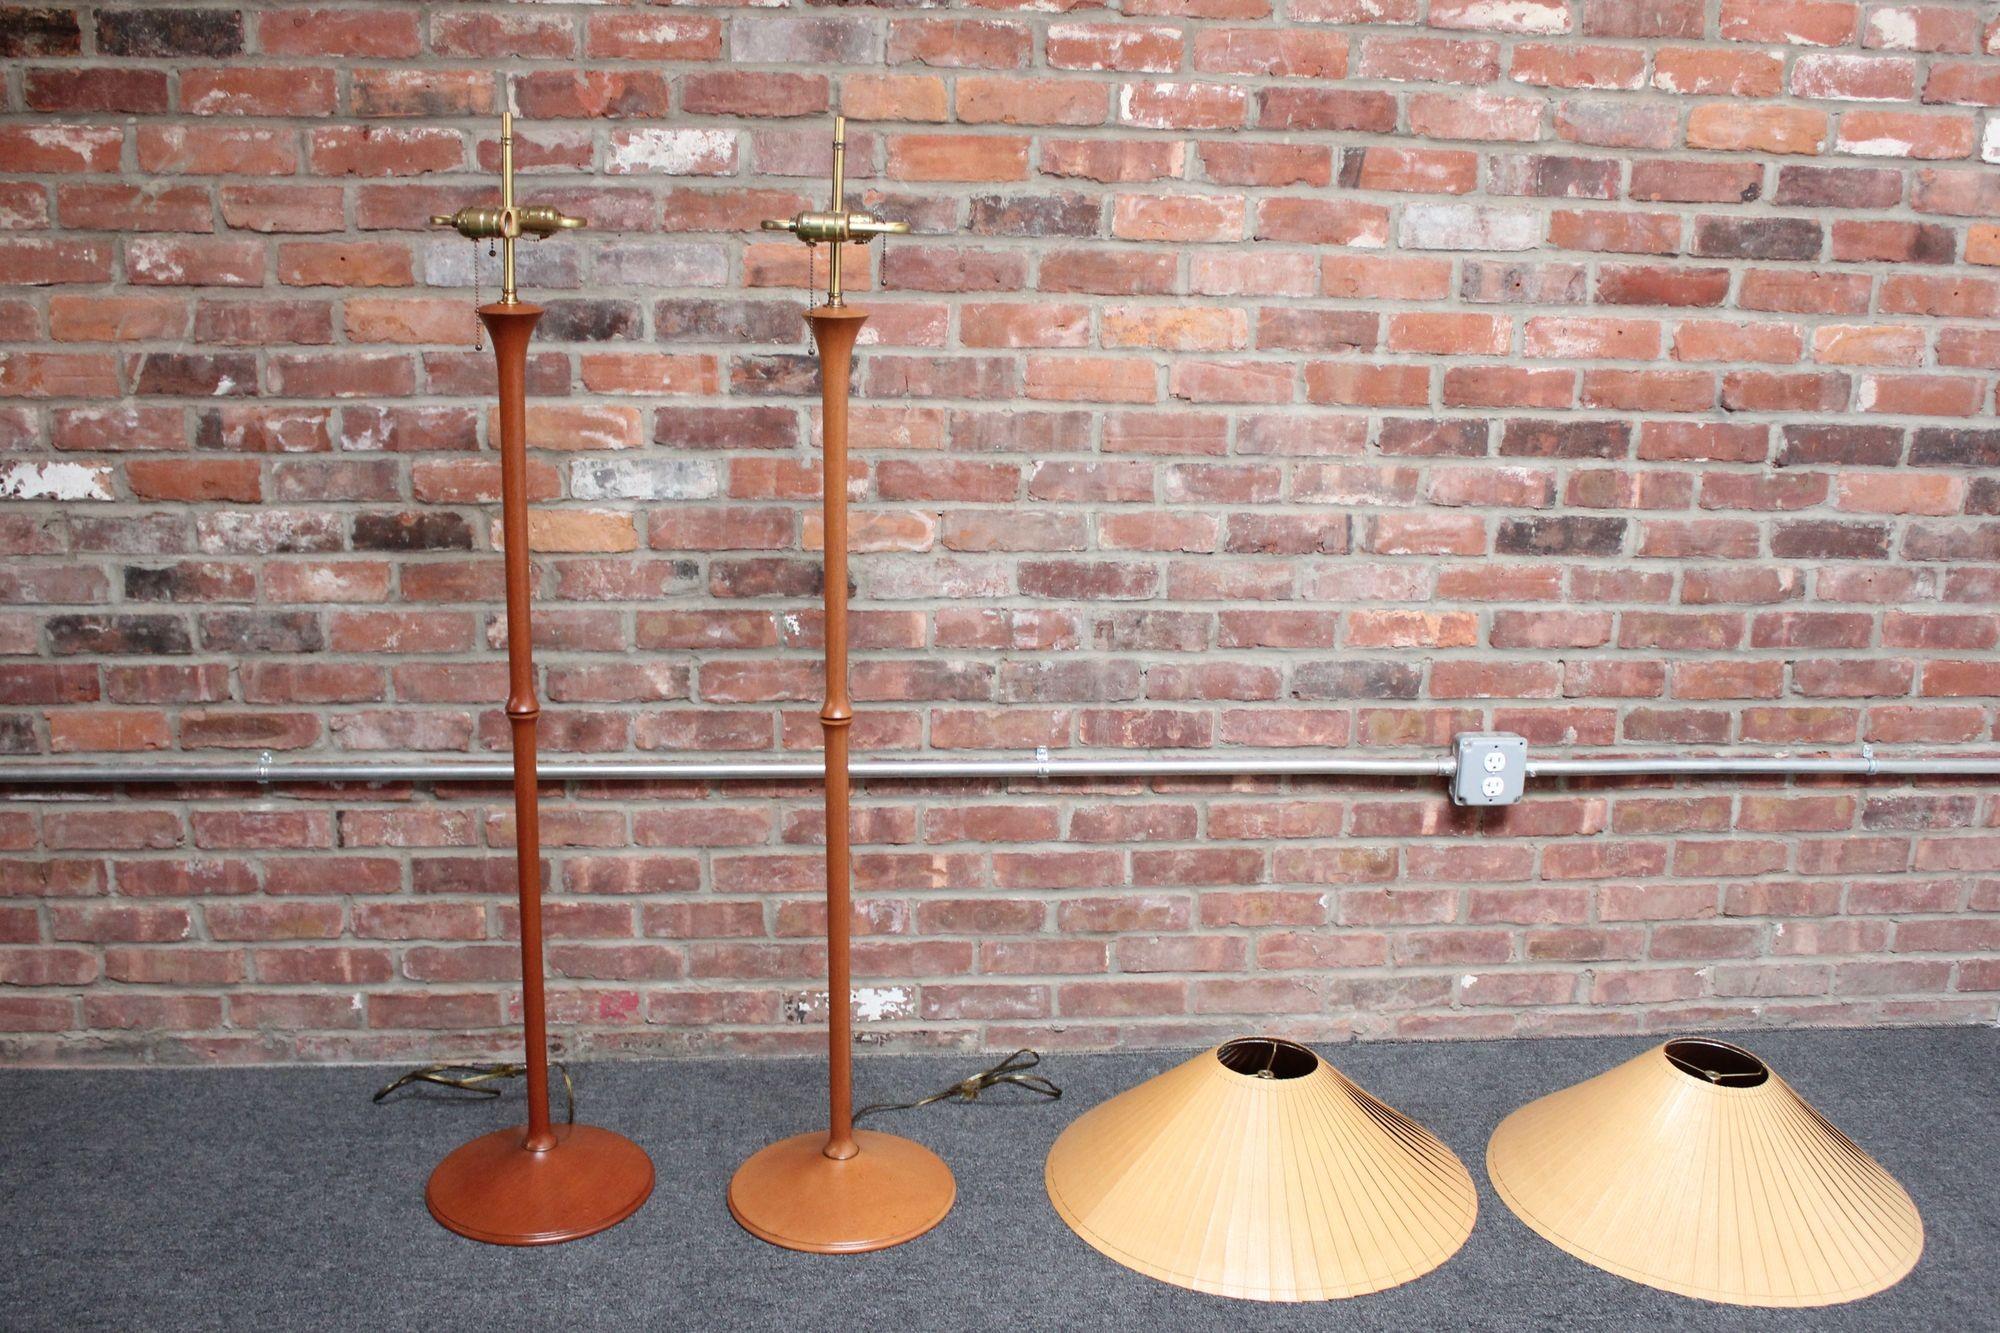 American Pair of Studio Craft Sculptural Cherry Wood and Brass Floor Lamps with Shades